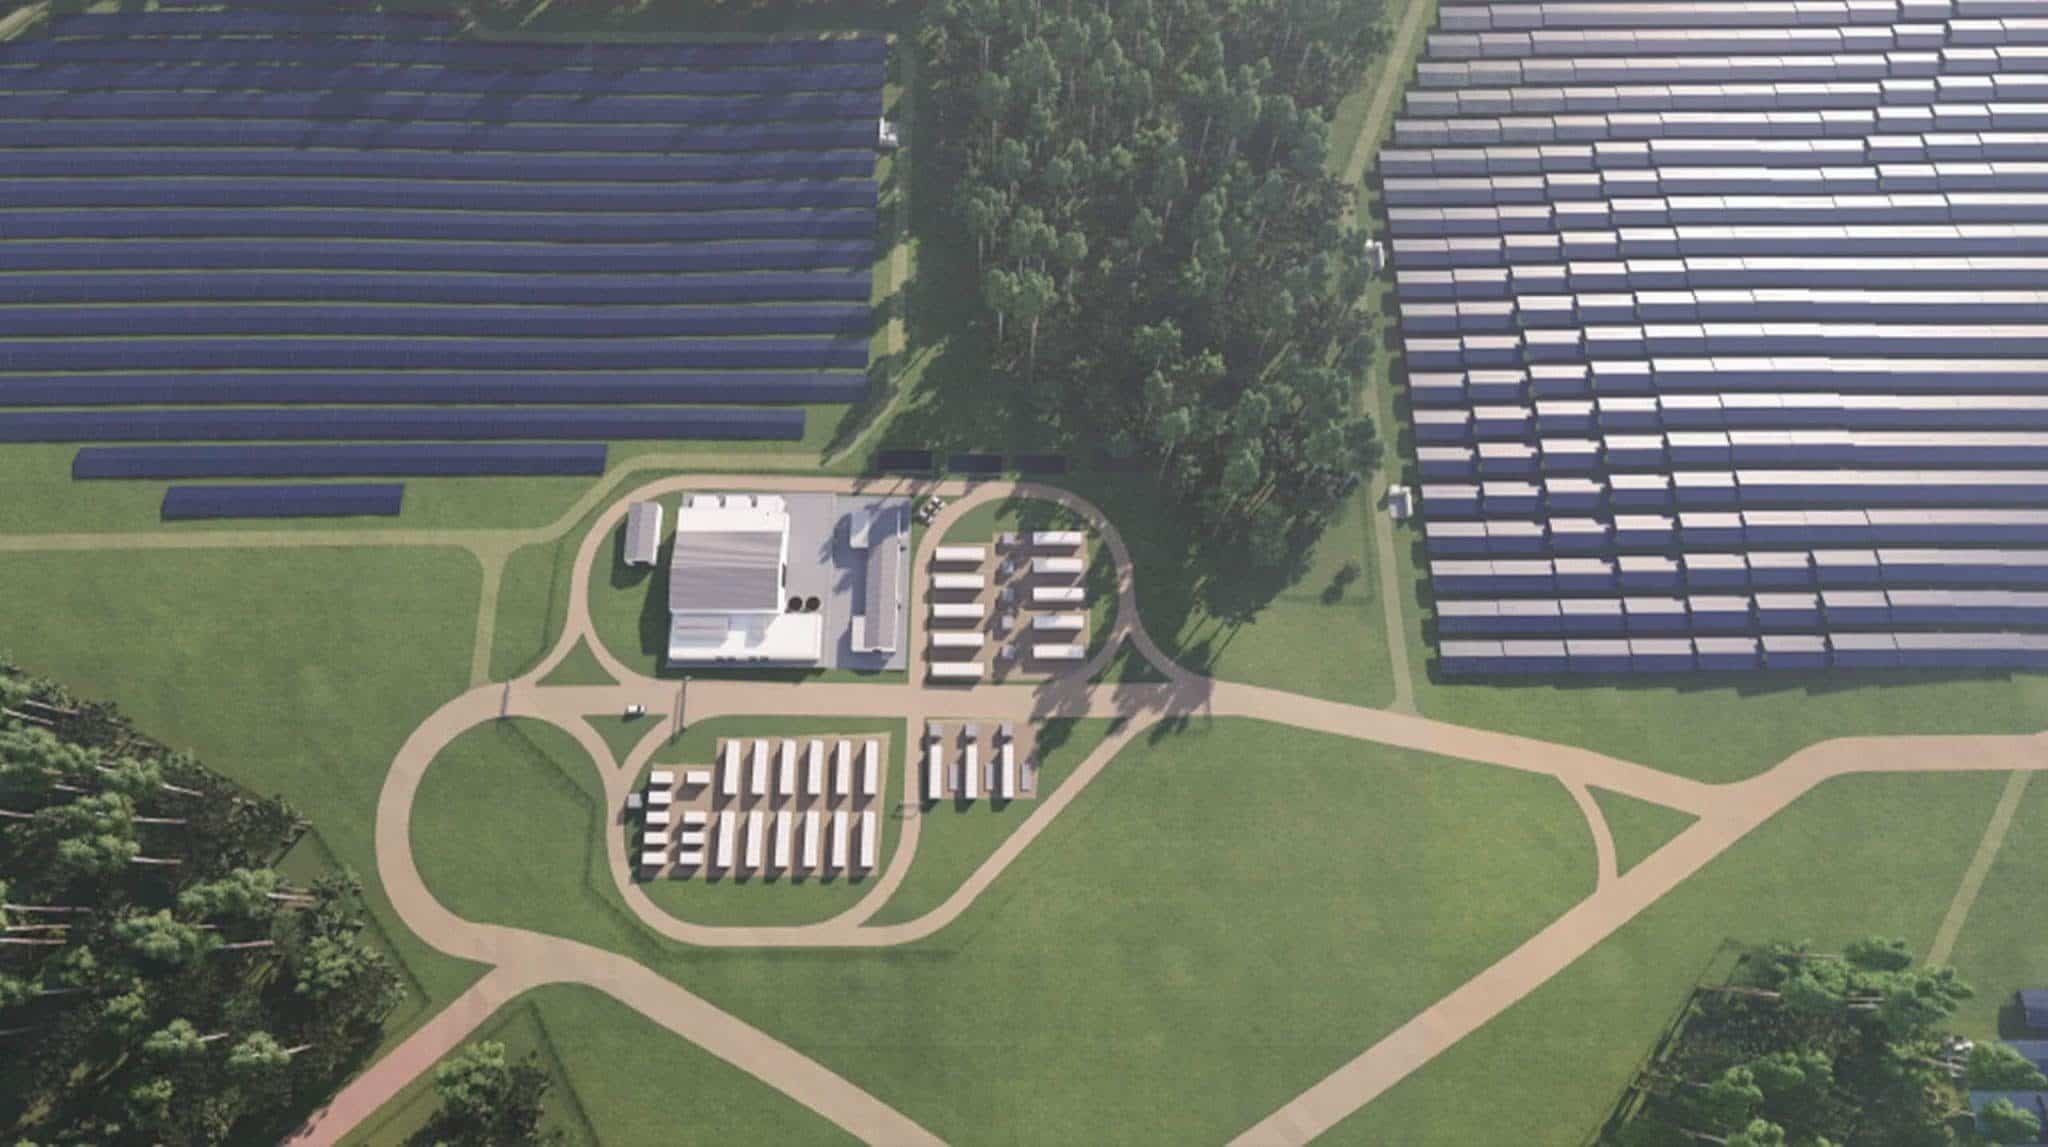 Aerial view of hydrogen power plant surrounded by grass